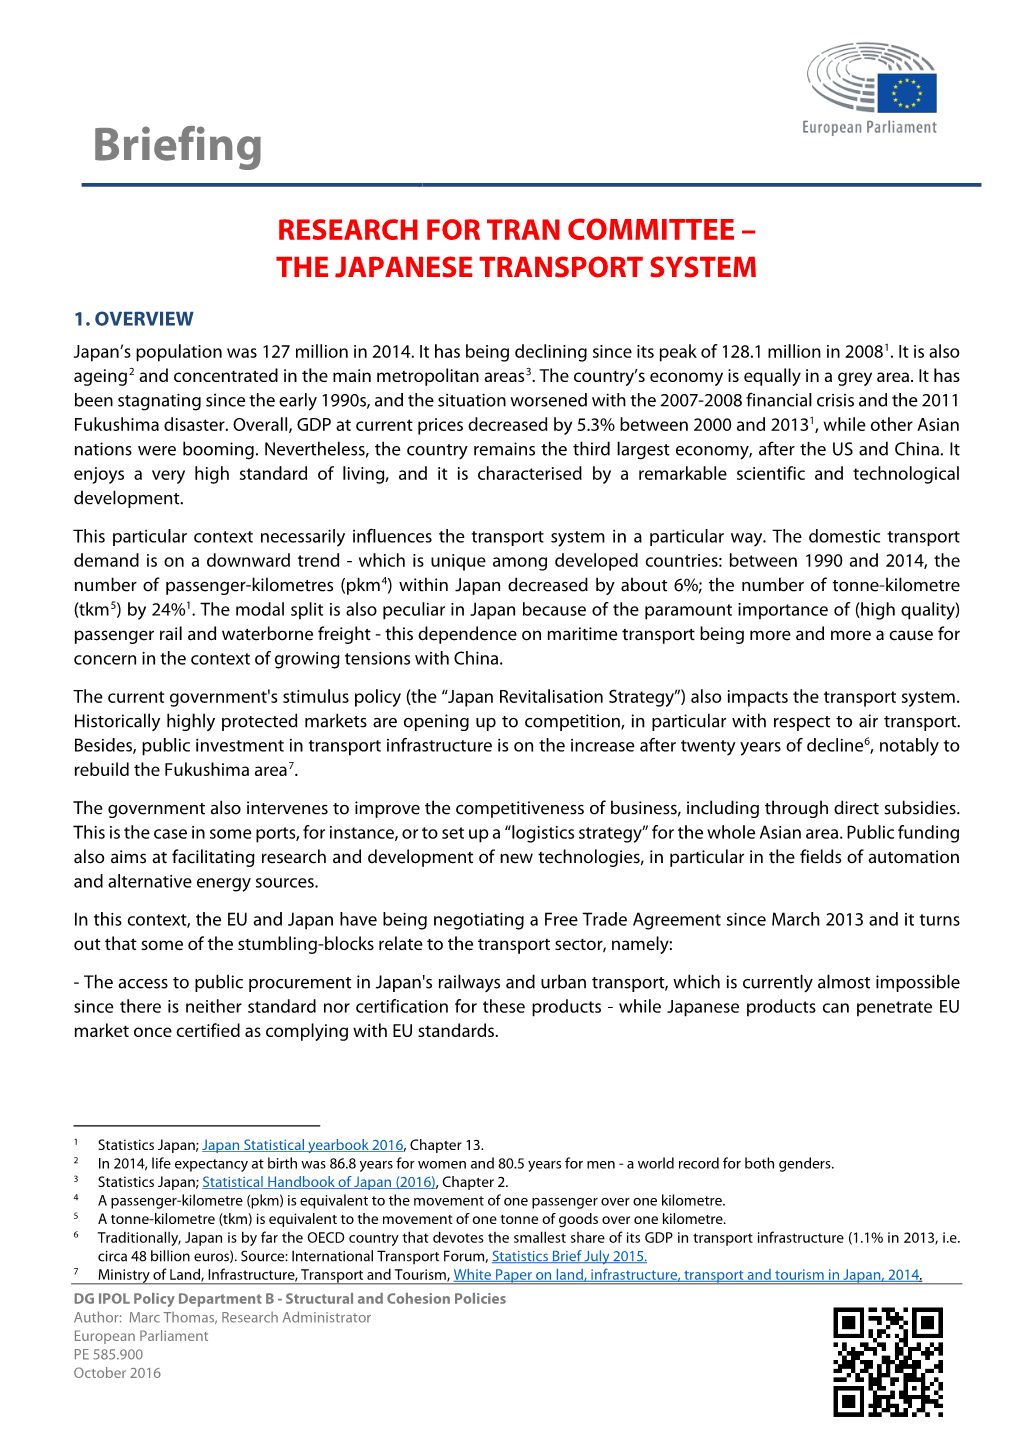 The Japanese Transport System